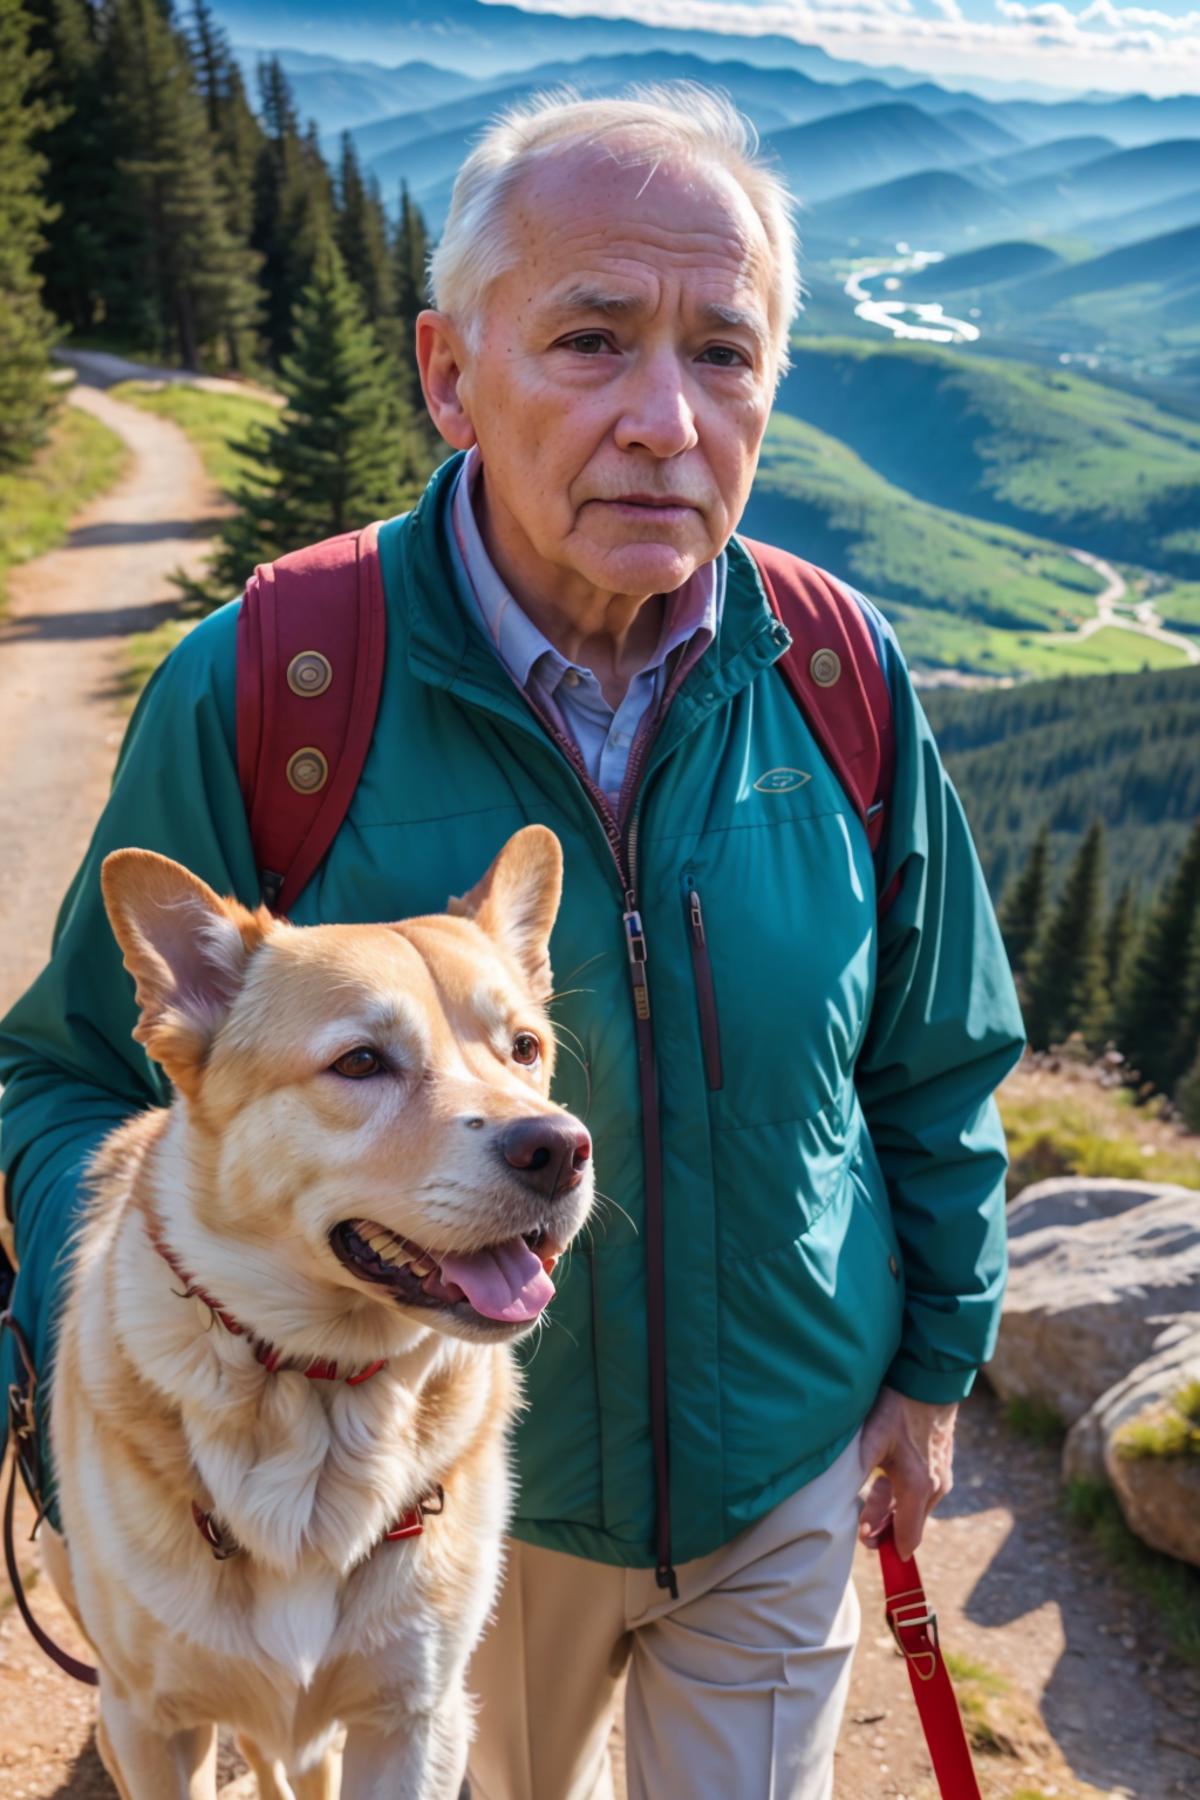 A man with a dog standing in a mountainous area.